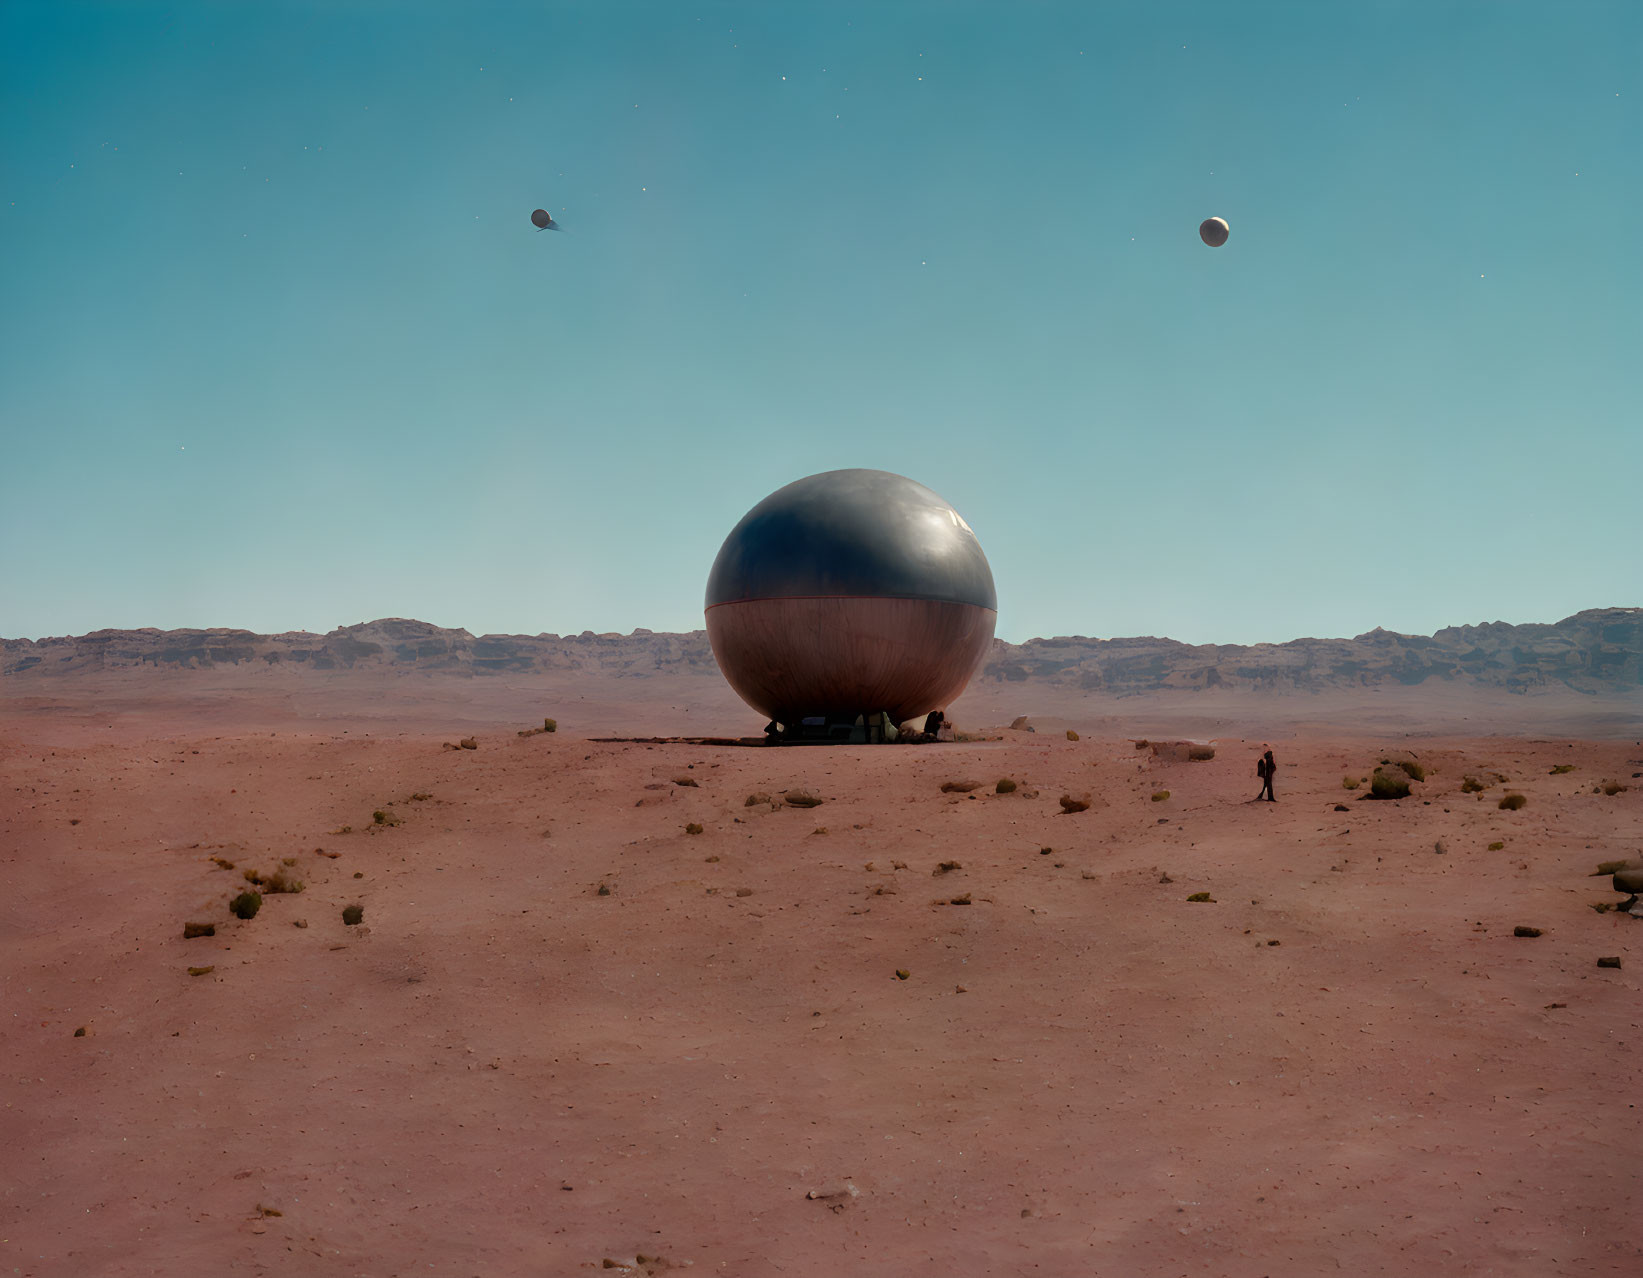 Shiny metallic sphere in desert with two people and distant planets